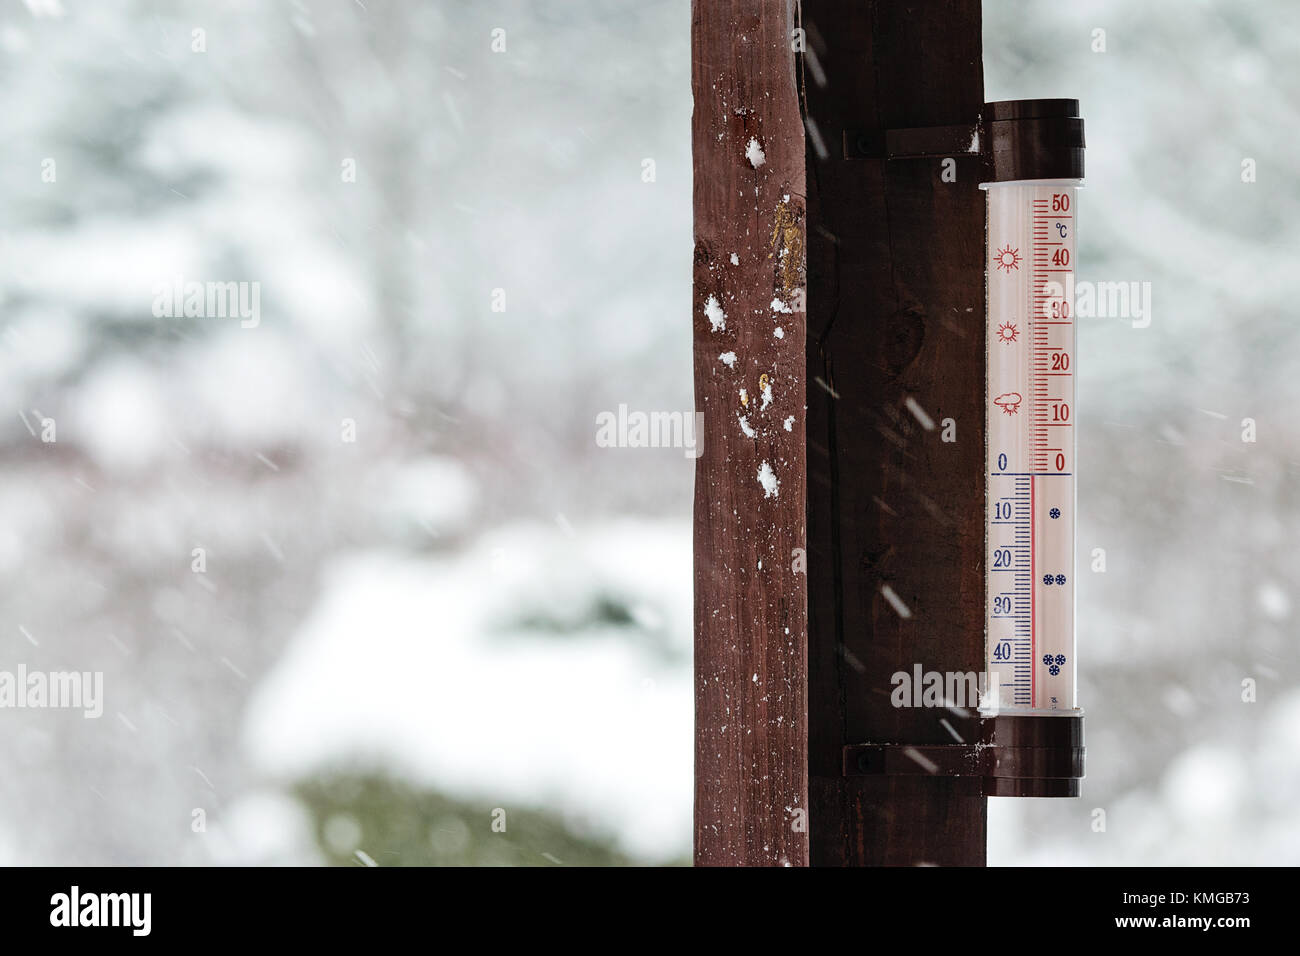 https://c8.alamy.com/comp/KMGB73/concept-image-of-winter-coming-thermometer-outside-the-house-indicates-KMGB73.jpg